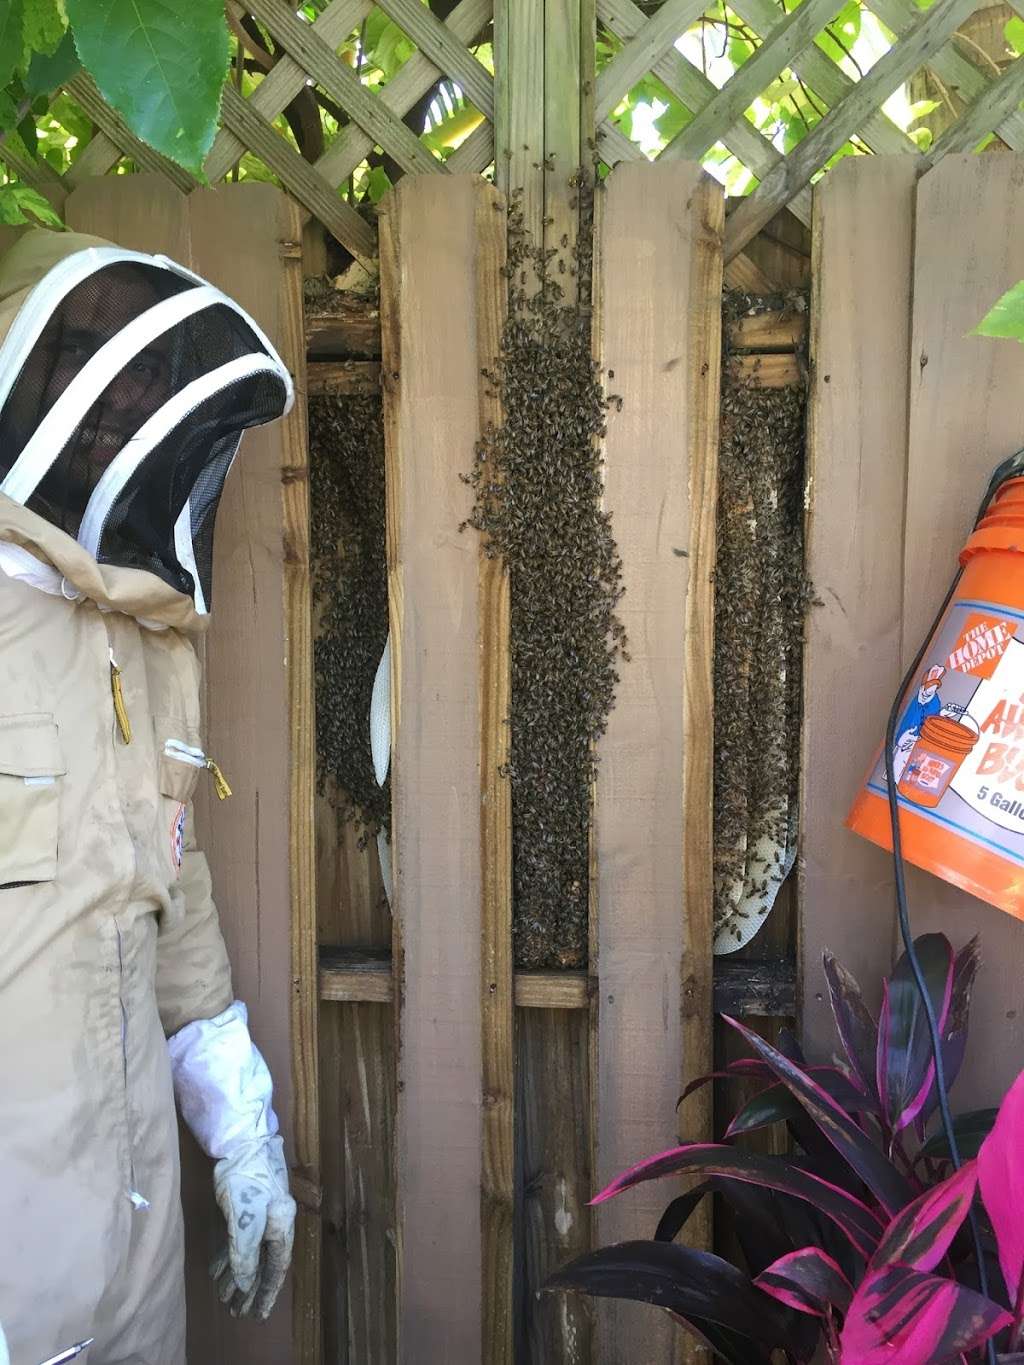 Easy Removal Solutions ( Bee removal) | 13211 74th St N, West Palm Beach, FL 33412 | Phone: (561) 248-7256